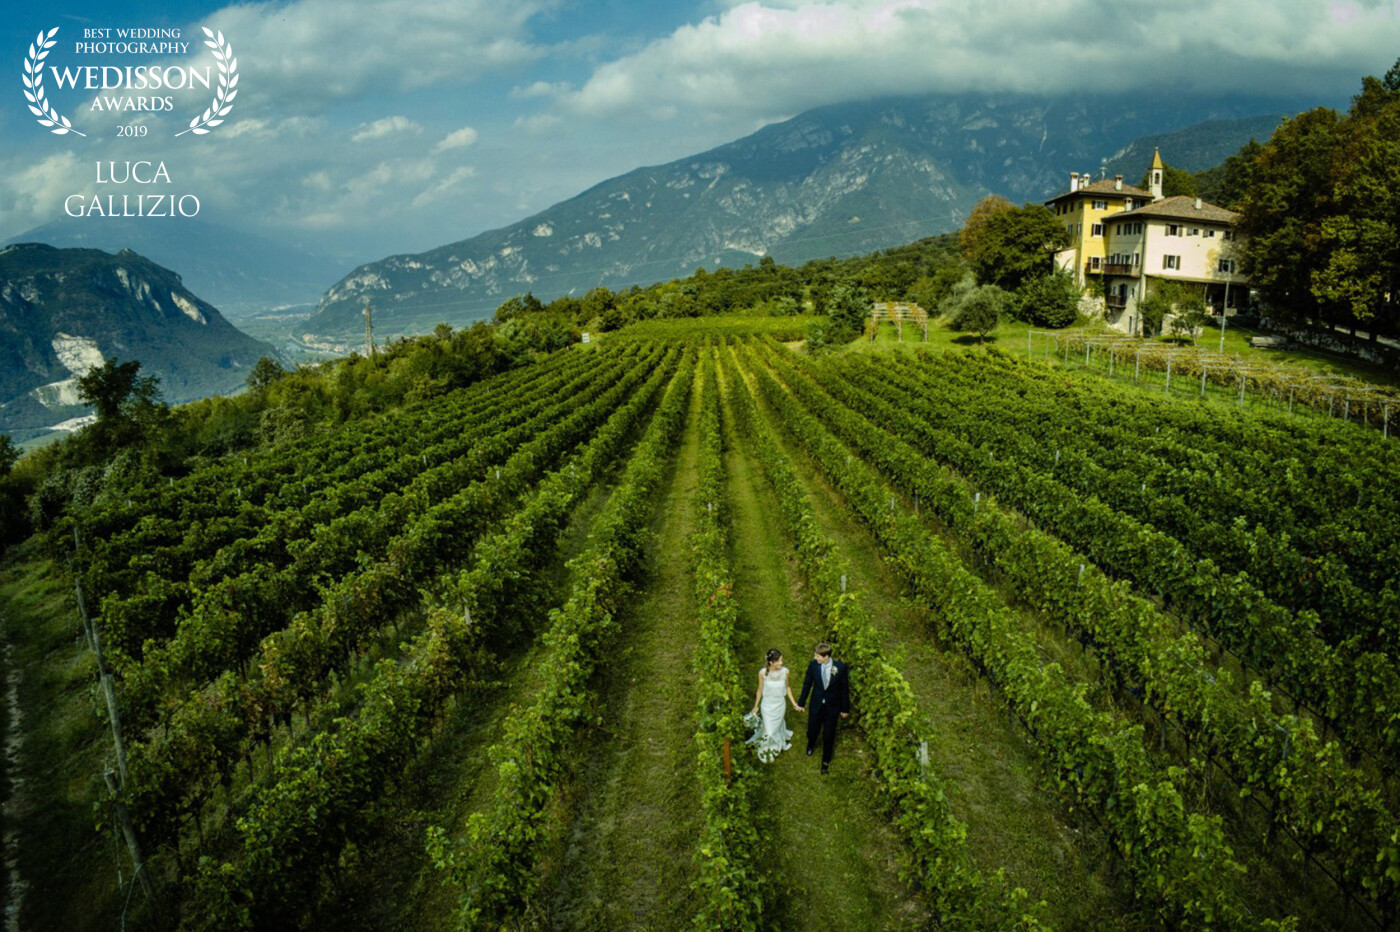 This picture was taken at the amazing location of Borgo dei Posseri, Ala, Trento, Italy. It's just stunning the view there, i used the place to frame them. The picture was taken during the wedding of Sara and Mattia.